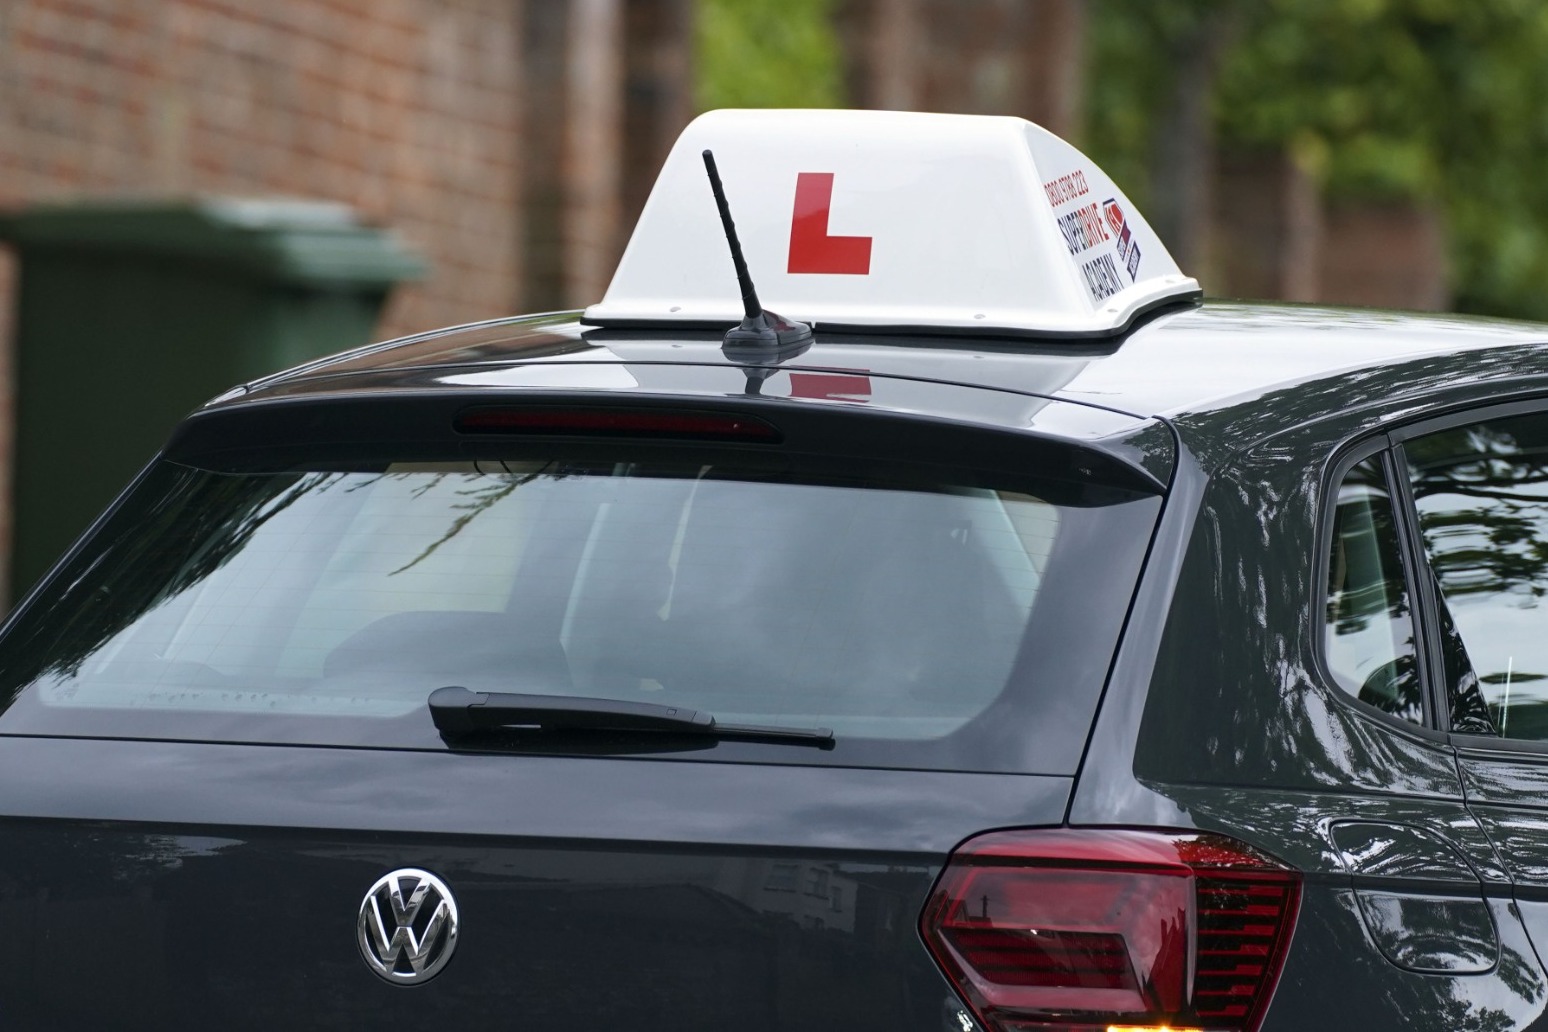 Strike action ruled out at DVLA as vote turnout fails to reach threshold 